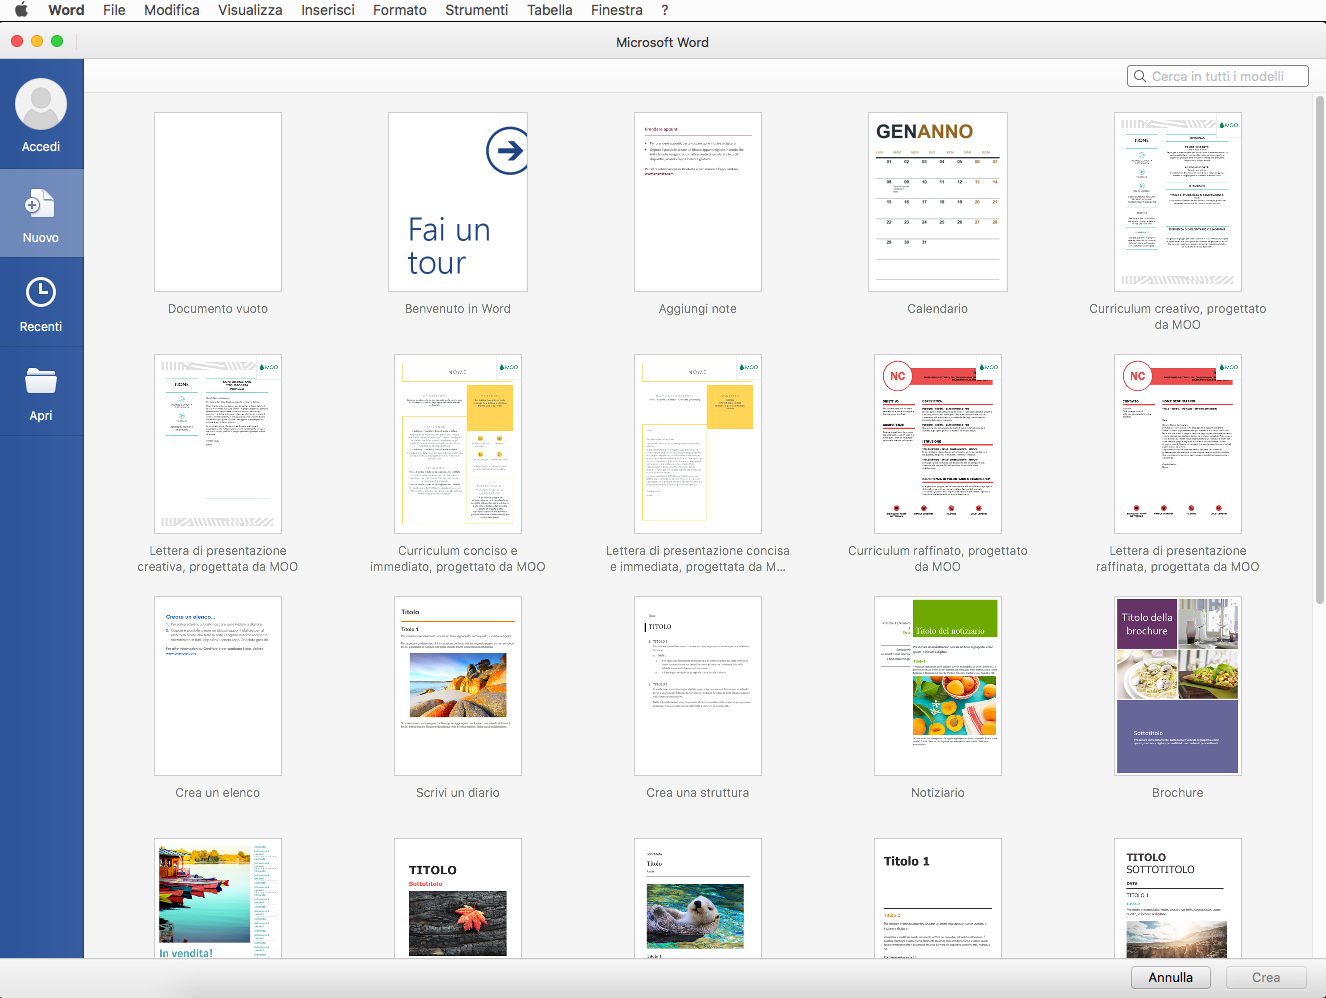 microsoft office for mac student